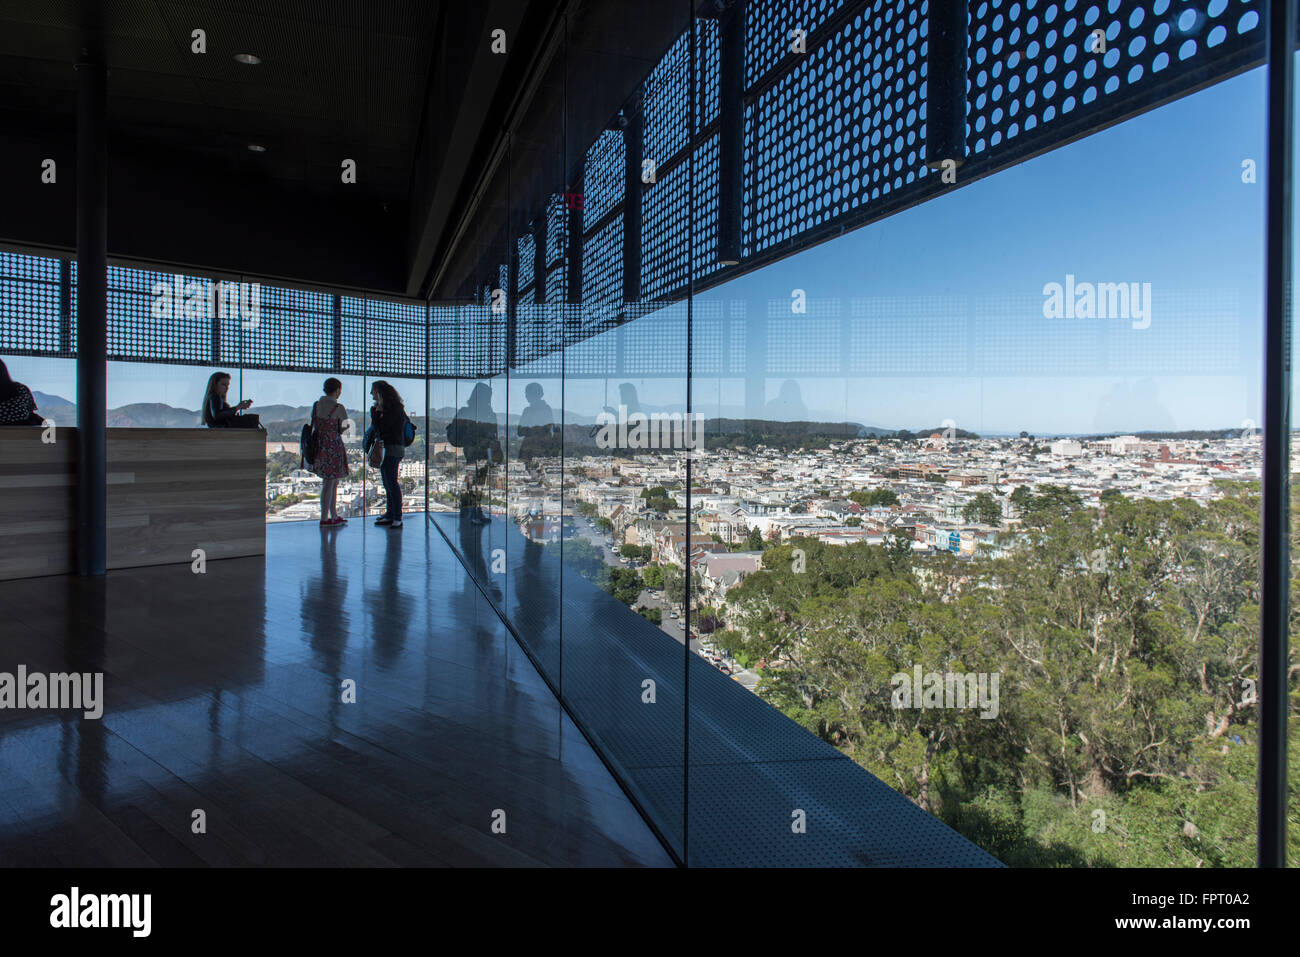 Interior of the Hamon observation tower at the M.H. de Young Museum and Art Gallery in Golden Gate Park, San Francisco, CA, USA Stock Photo